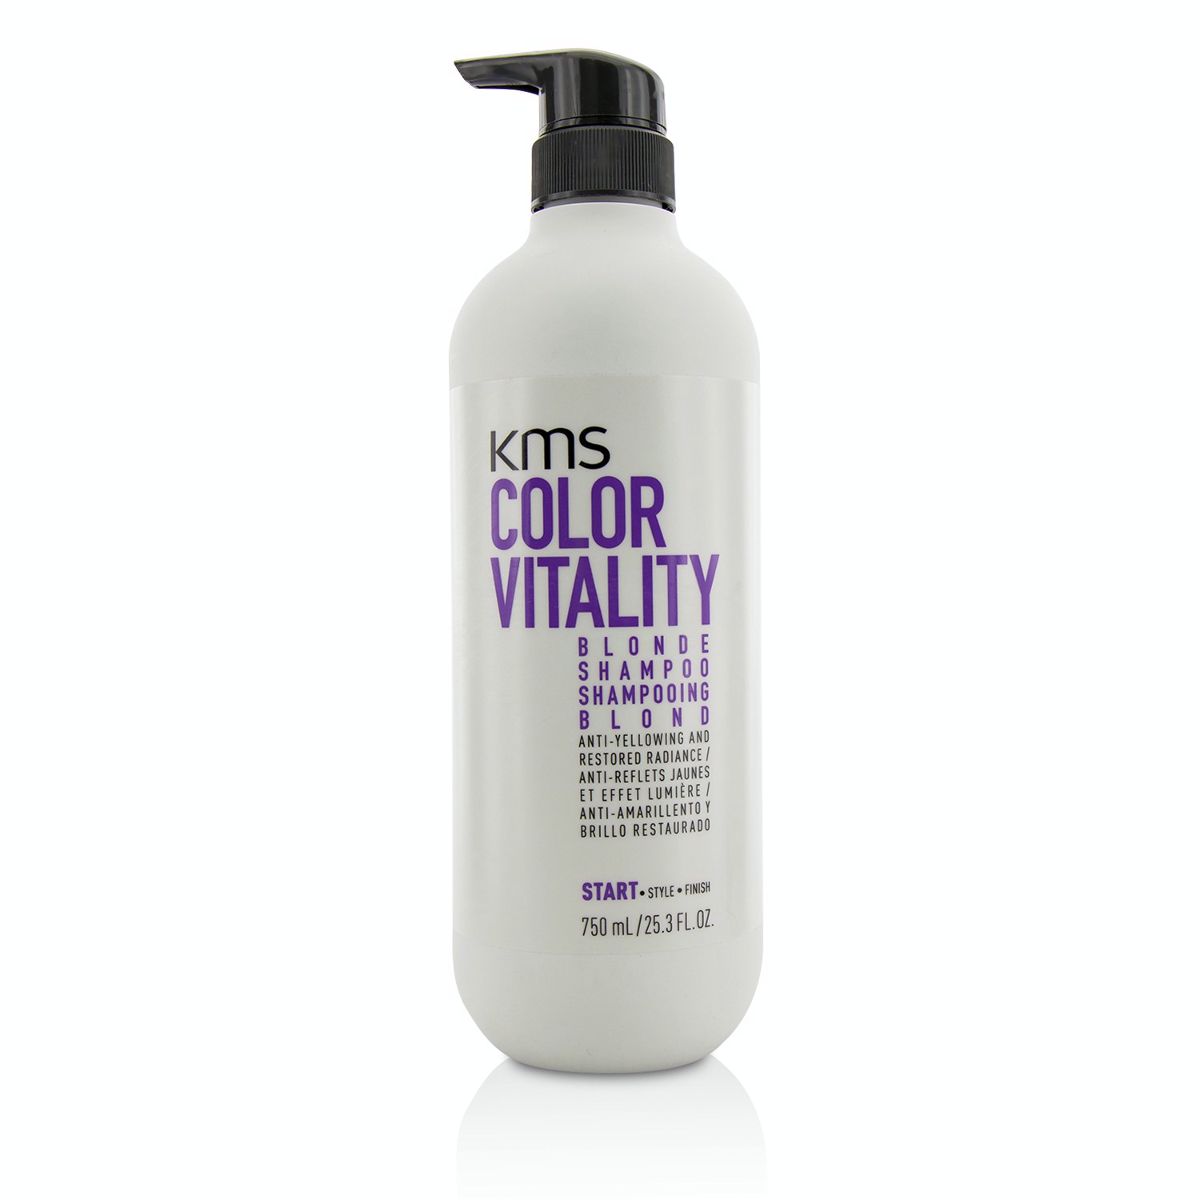 Color Vitality Blonde Shampoo (Anti-Yellowing and Restored Radiance) KMS California Image